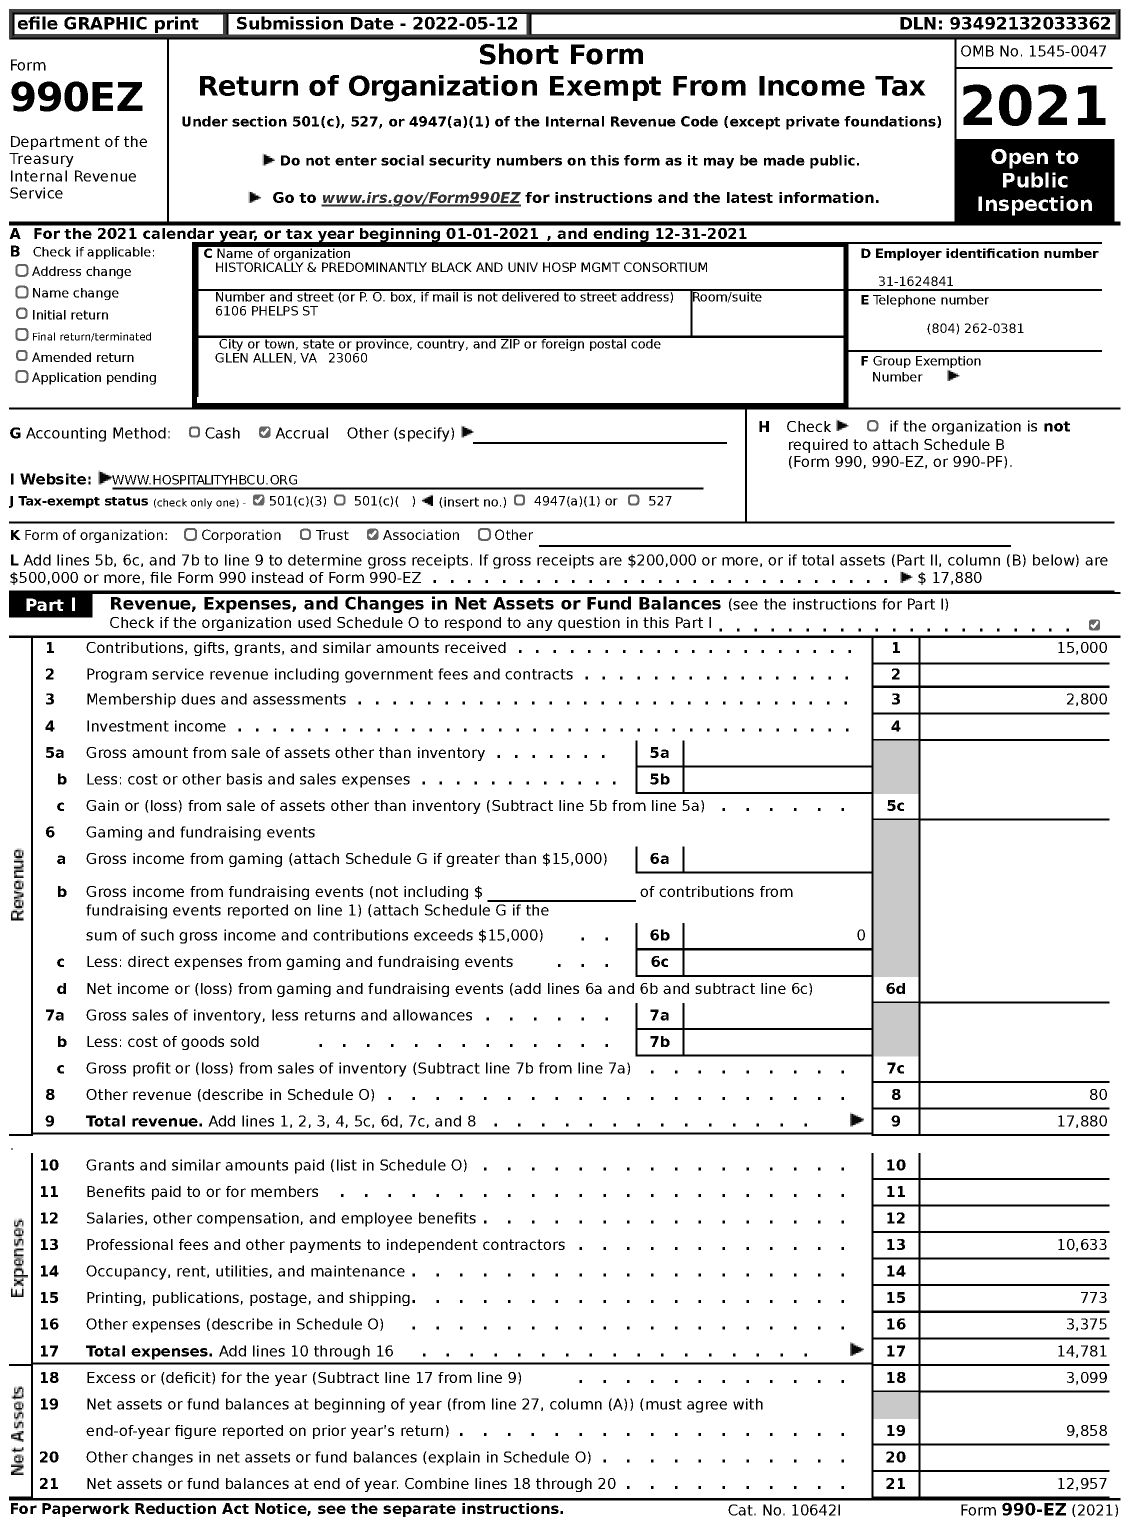 Image of first page of 2021 Form 990EZ for Historically and Predominantly Black and Univ Hospital MGMT Consortium